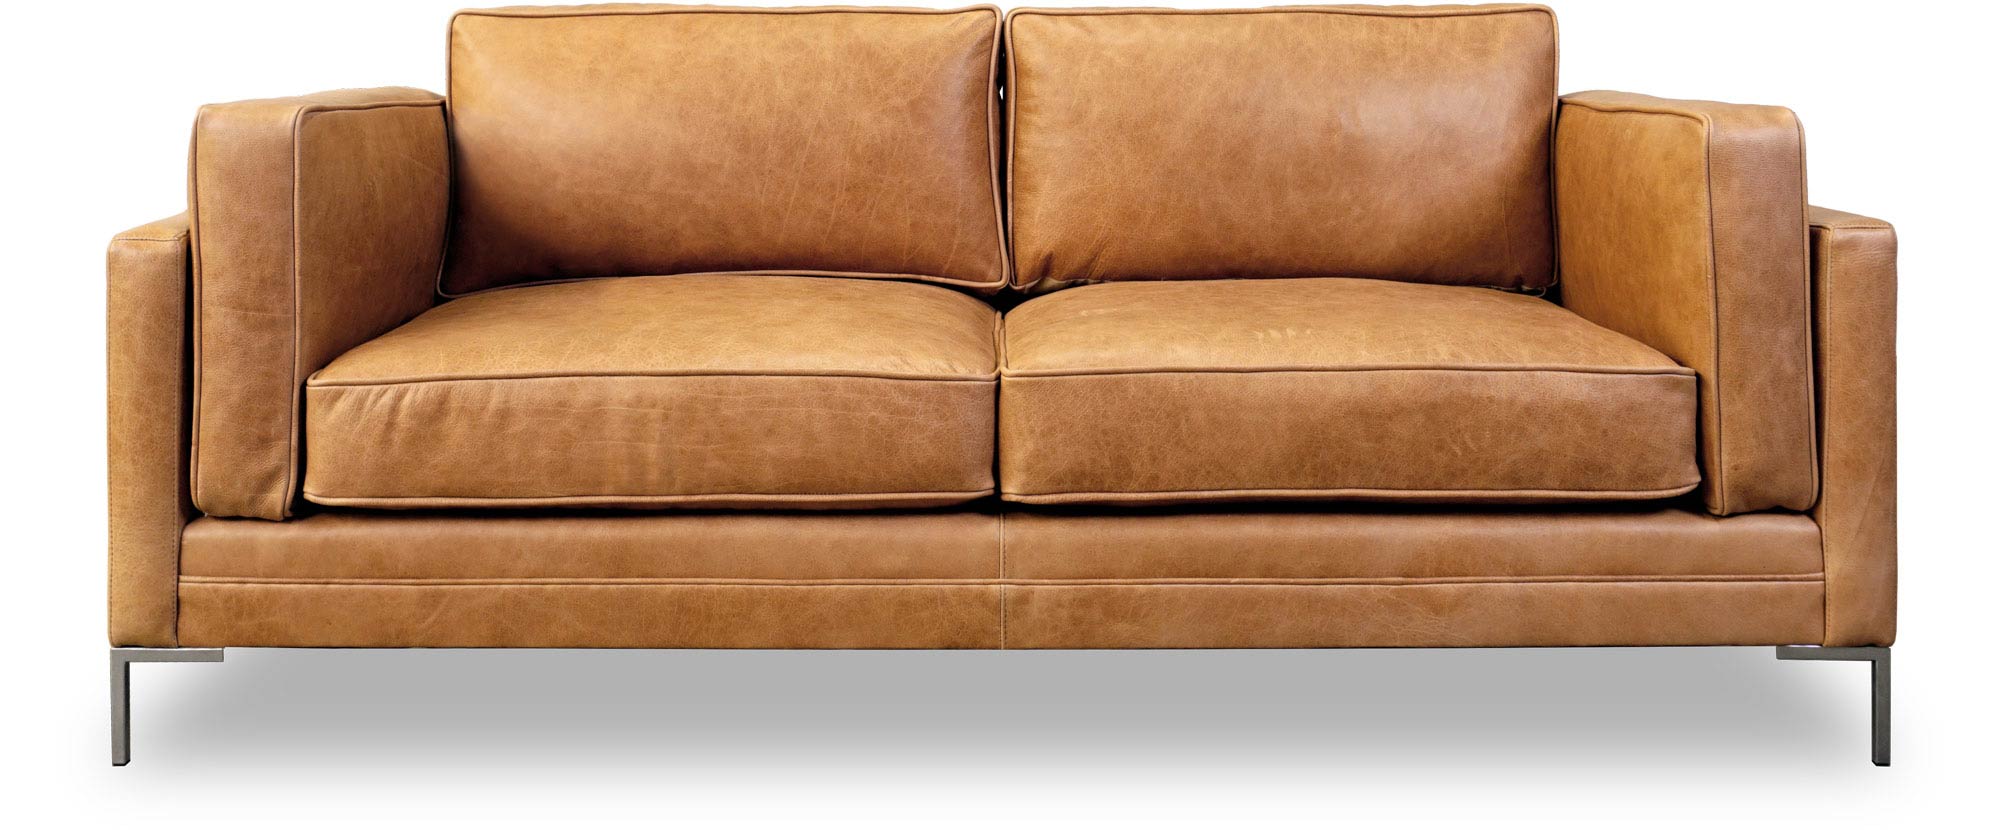 79 Coach sofa in Wild West Sage Brush leather